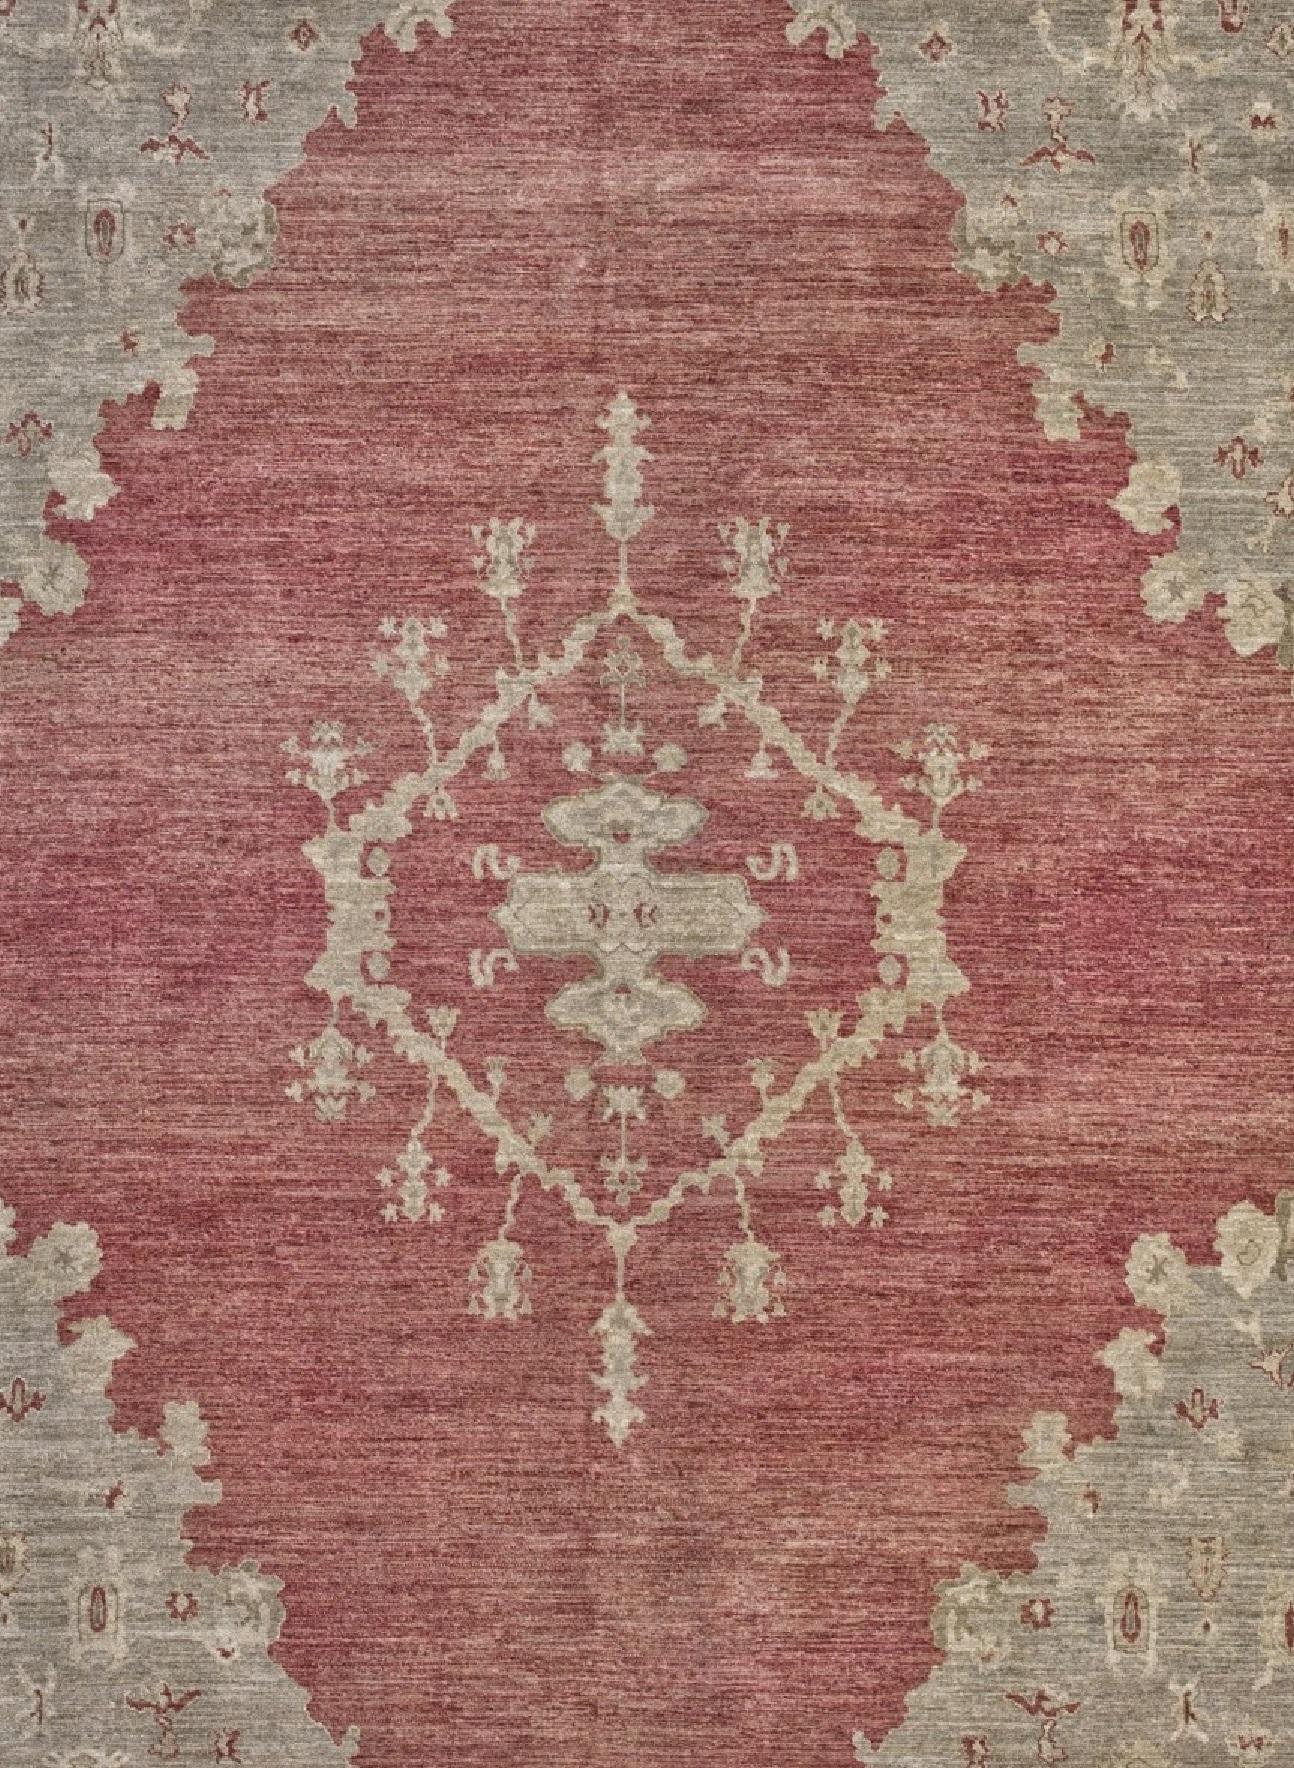 Oushak rugs are the most popular and one of the oldest traditional rugs. Oushak (Usak) rugs that use a particular family of designs, called by convention after the city of Ushak, Turkey. Oushak rugs are known for the silky, luminous wool they work